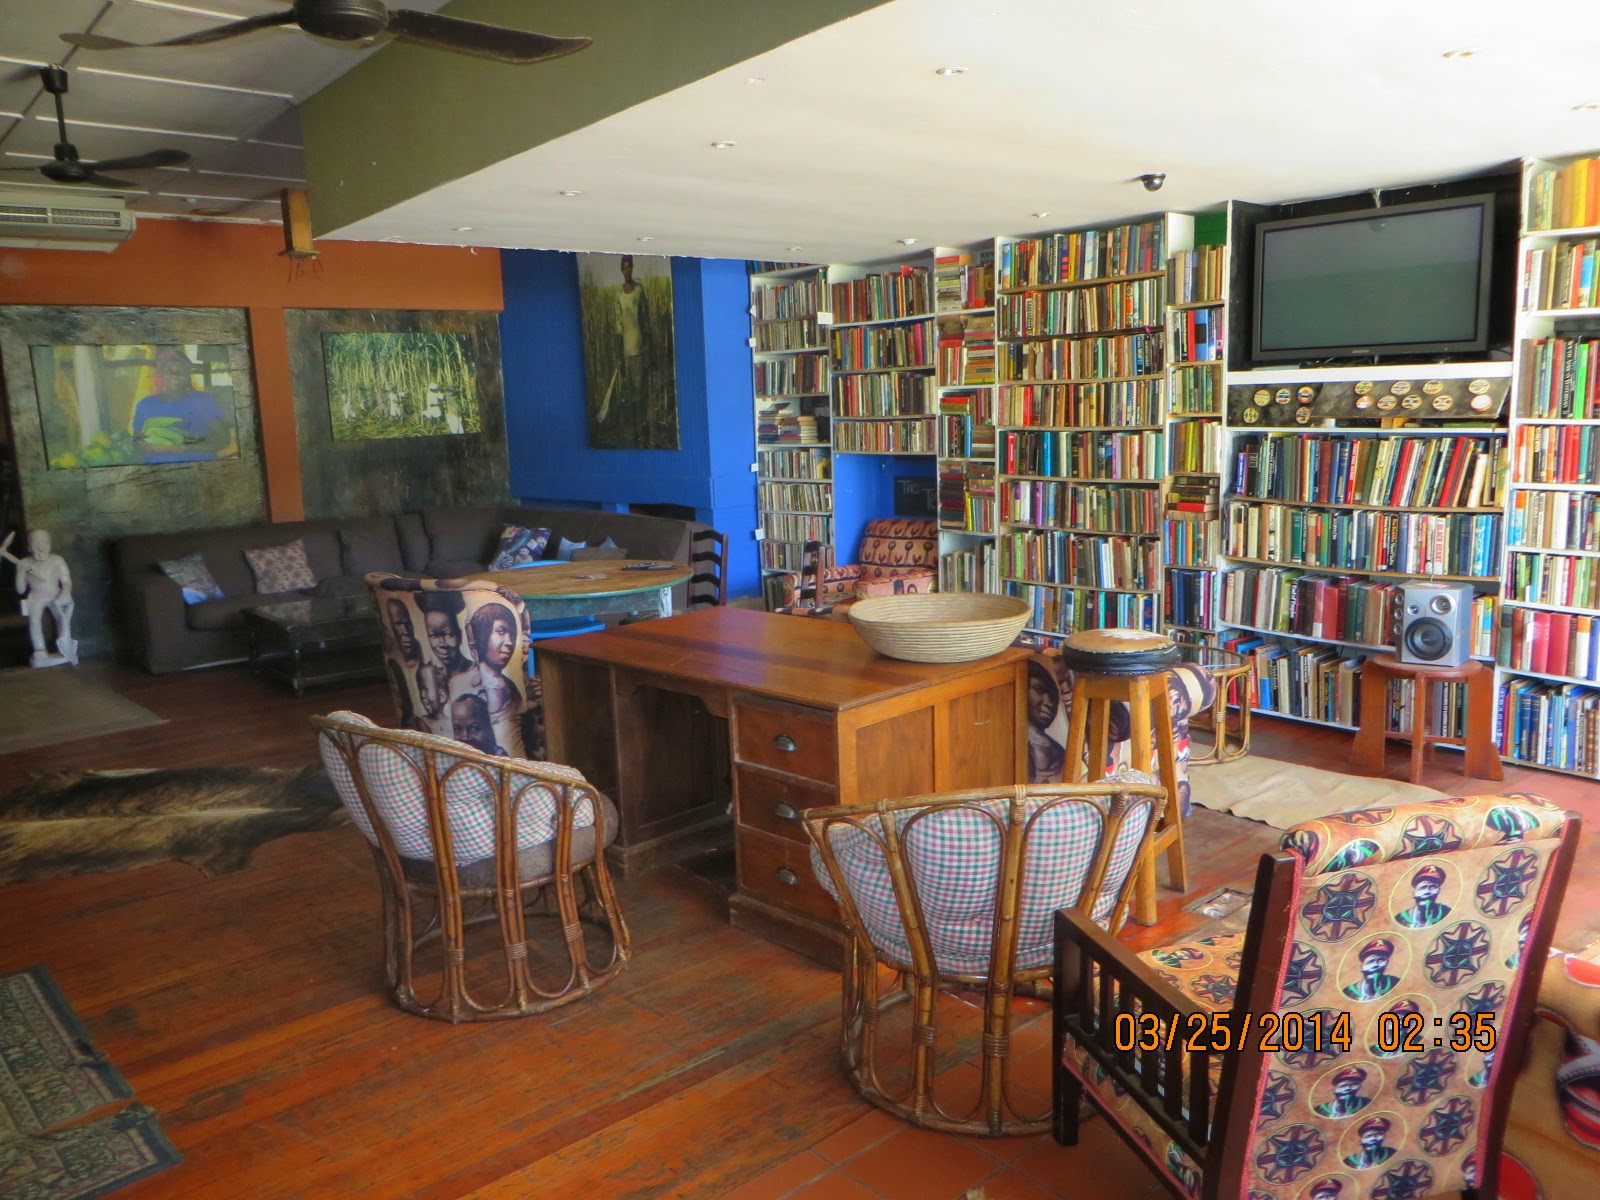 "The Traveler's Family Room" at George Hotel, Eshowe, Zululand